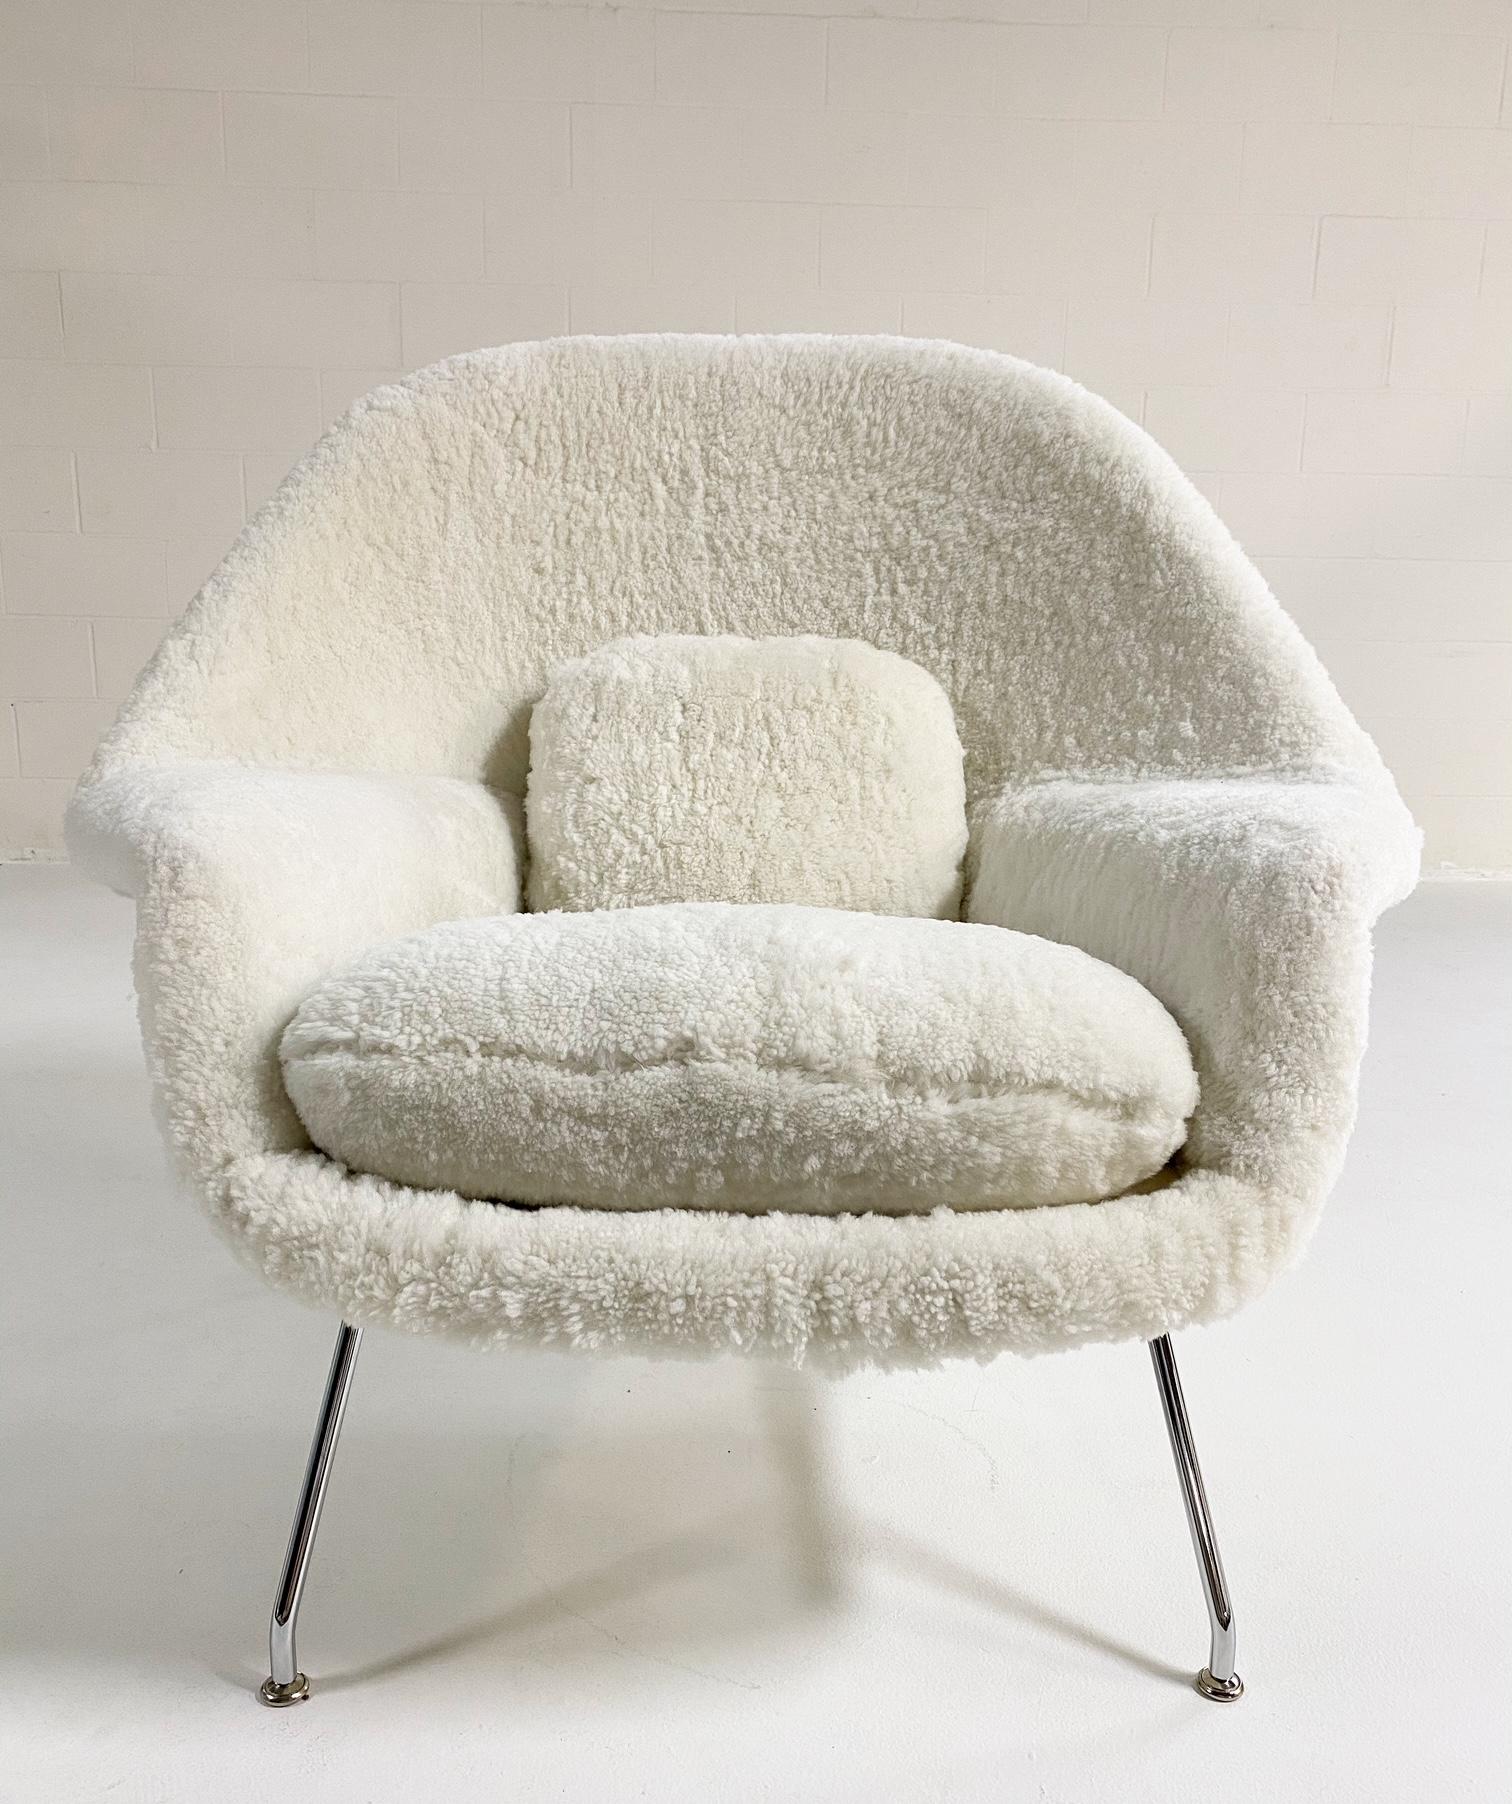 Forsyth Bespoke Eero Saarinen Womb Chair and Ottoman in Australian Sheepskin In Excellent Condition For Sale In SAINT LOUIS, MO